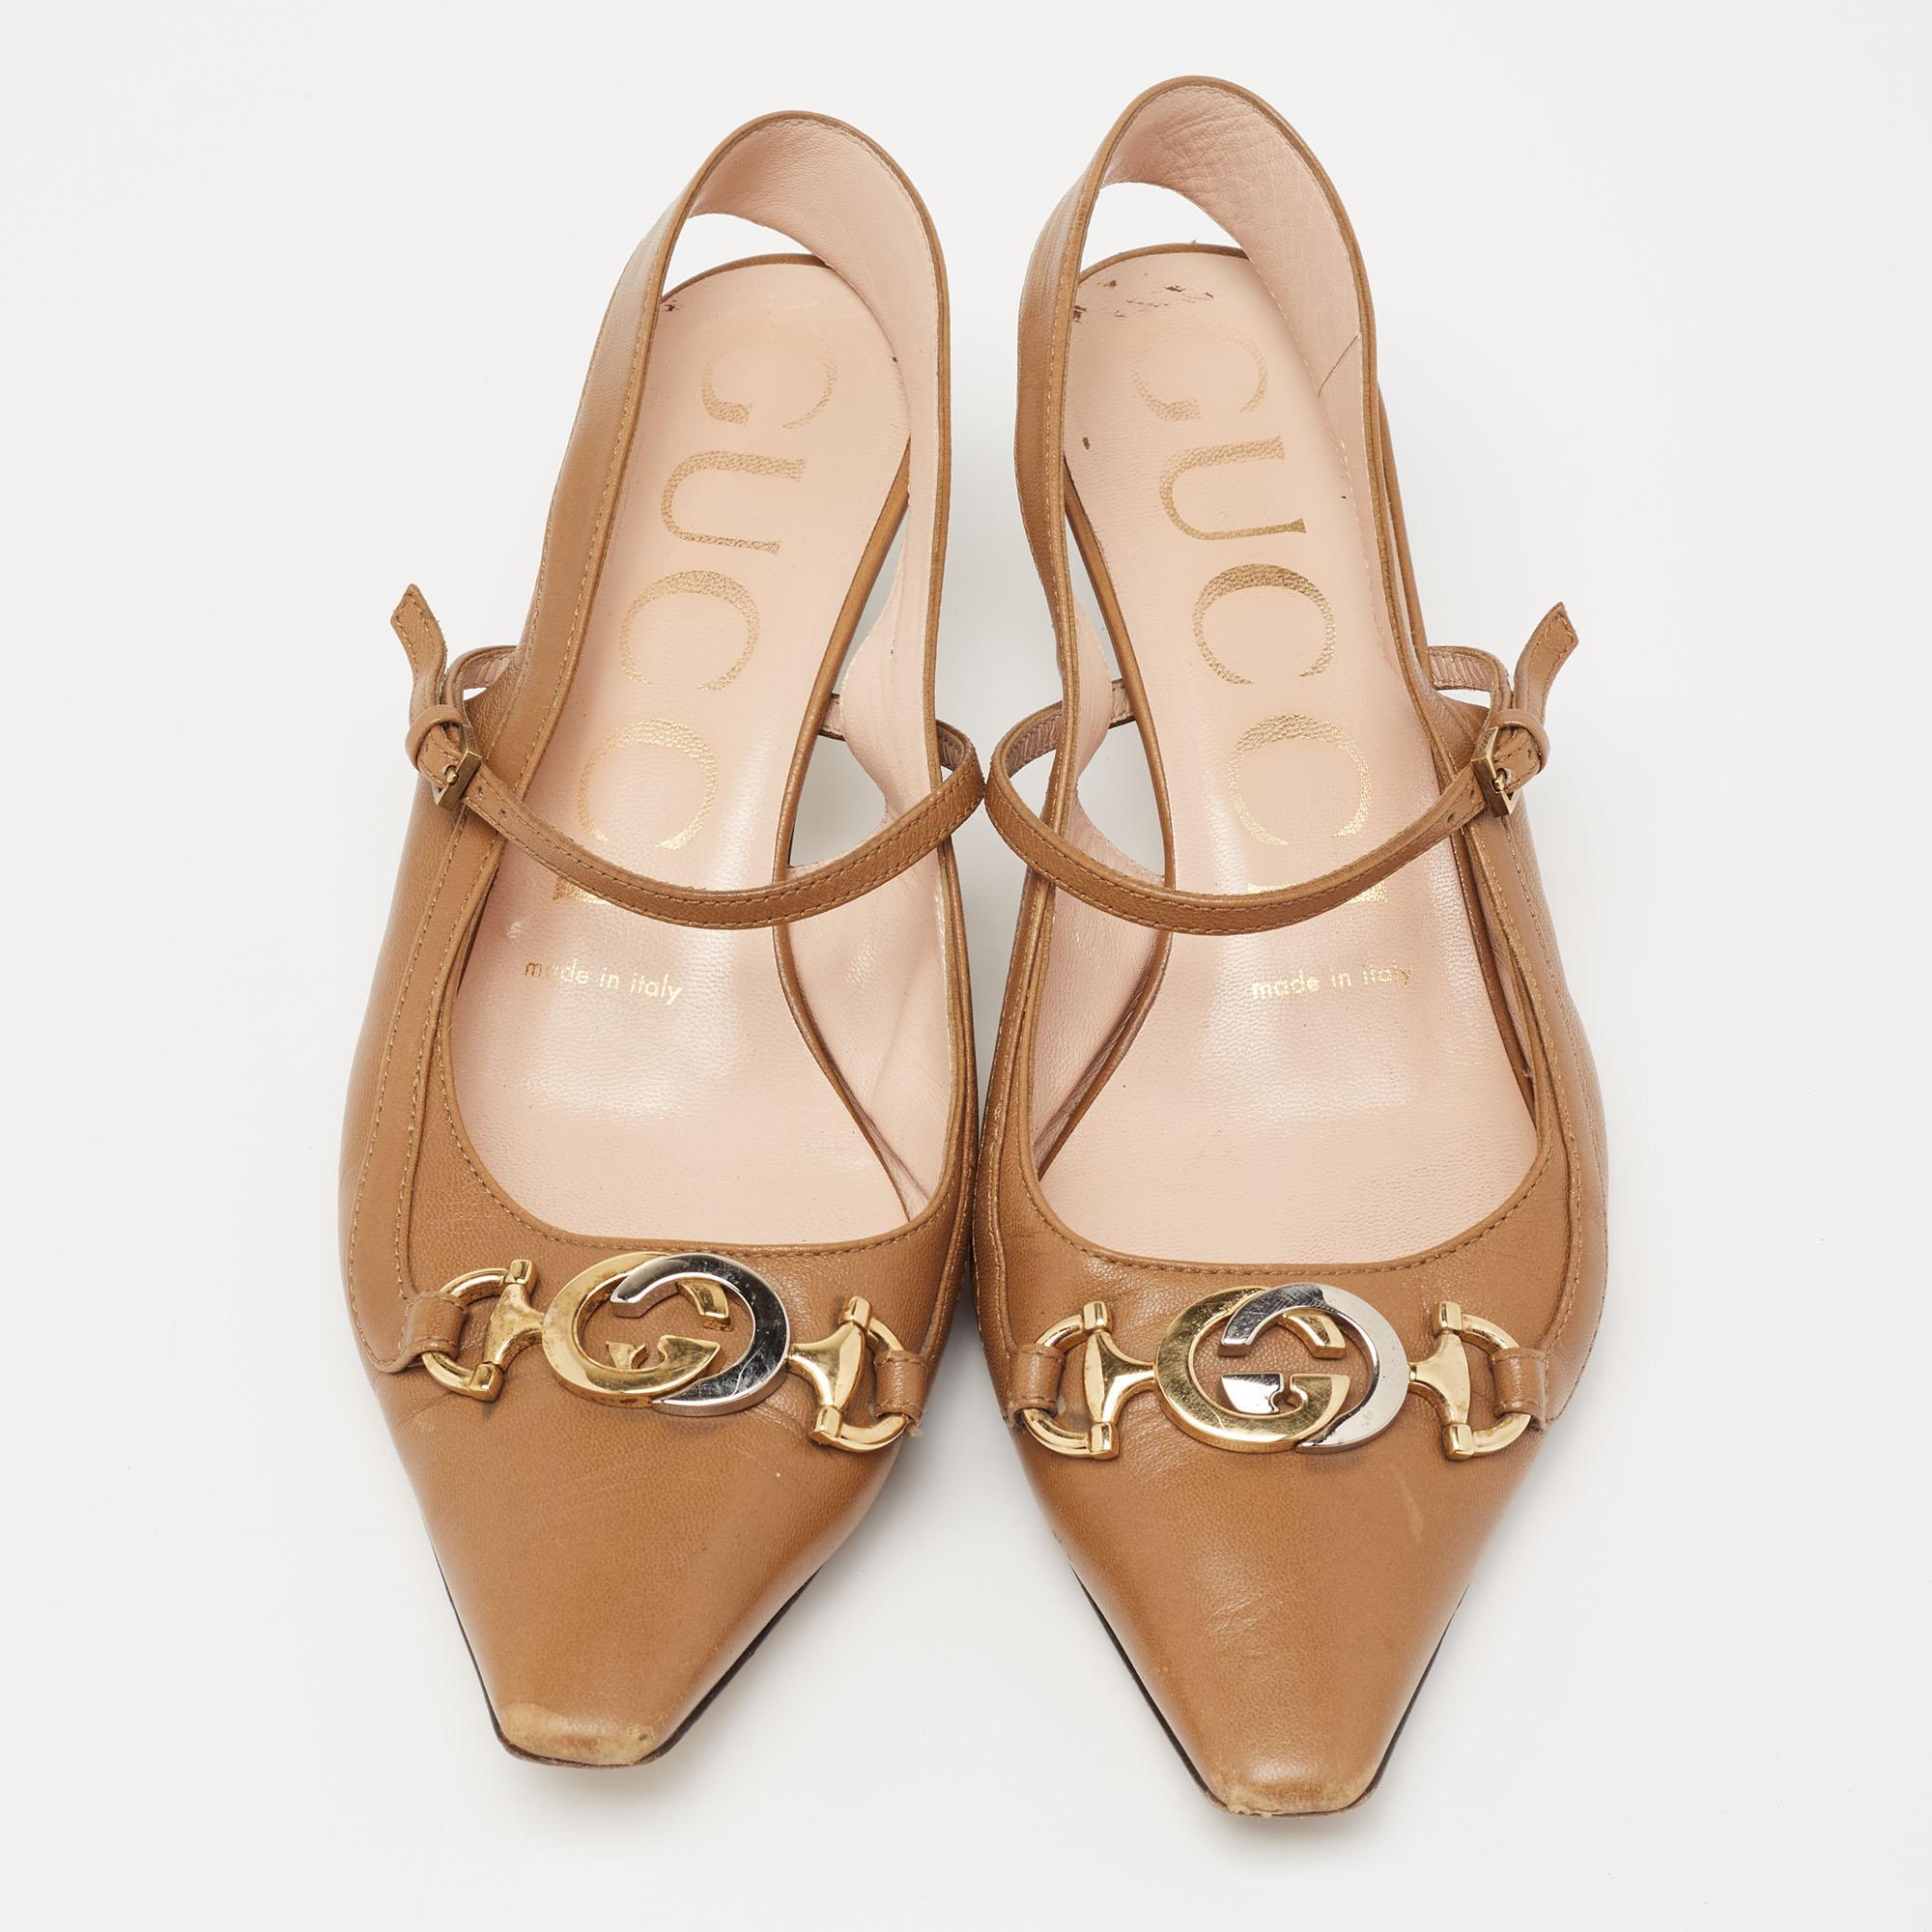 Gucci brings an element of class to your closet with these stunning Zumi pumps. They are created using brown leather, with an Interlocking G Horsebit motif perched on the pointed toes. They showcase 4.5 cm heels, gold-tone hardware, and a buckled